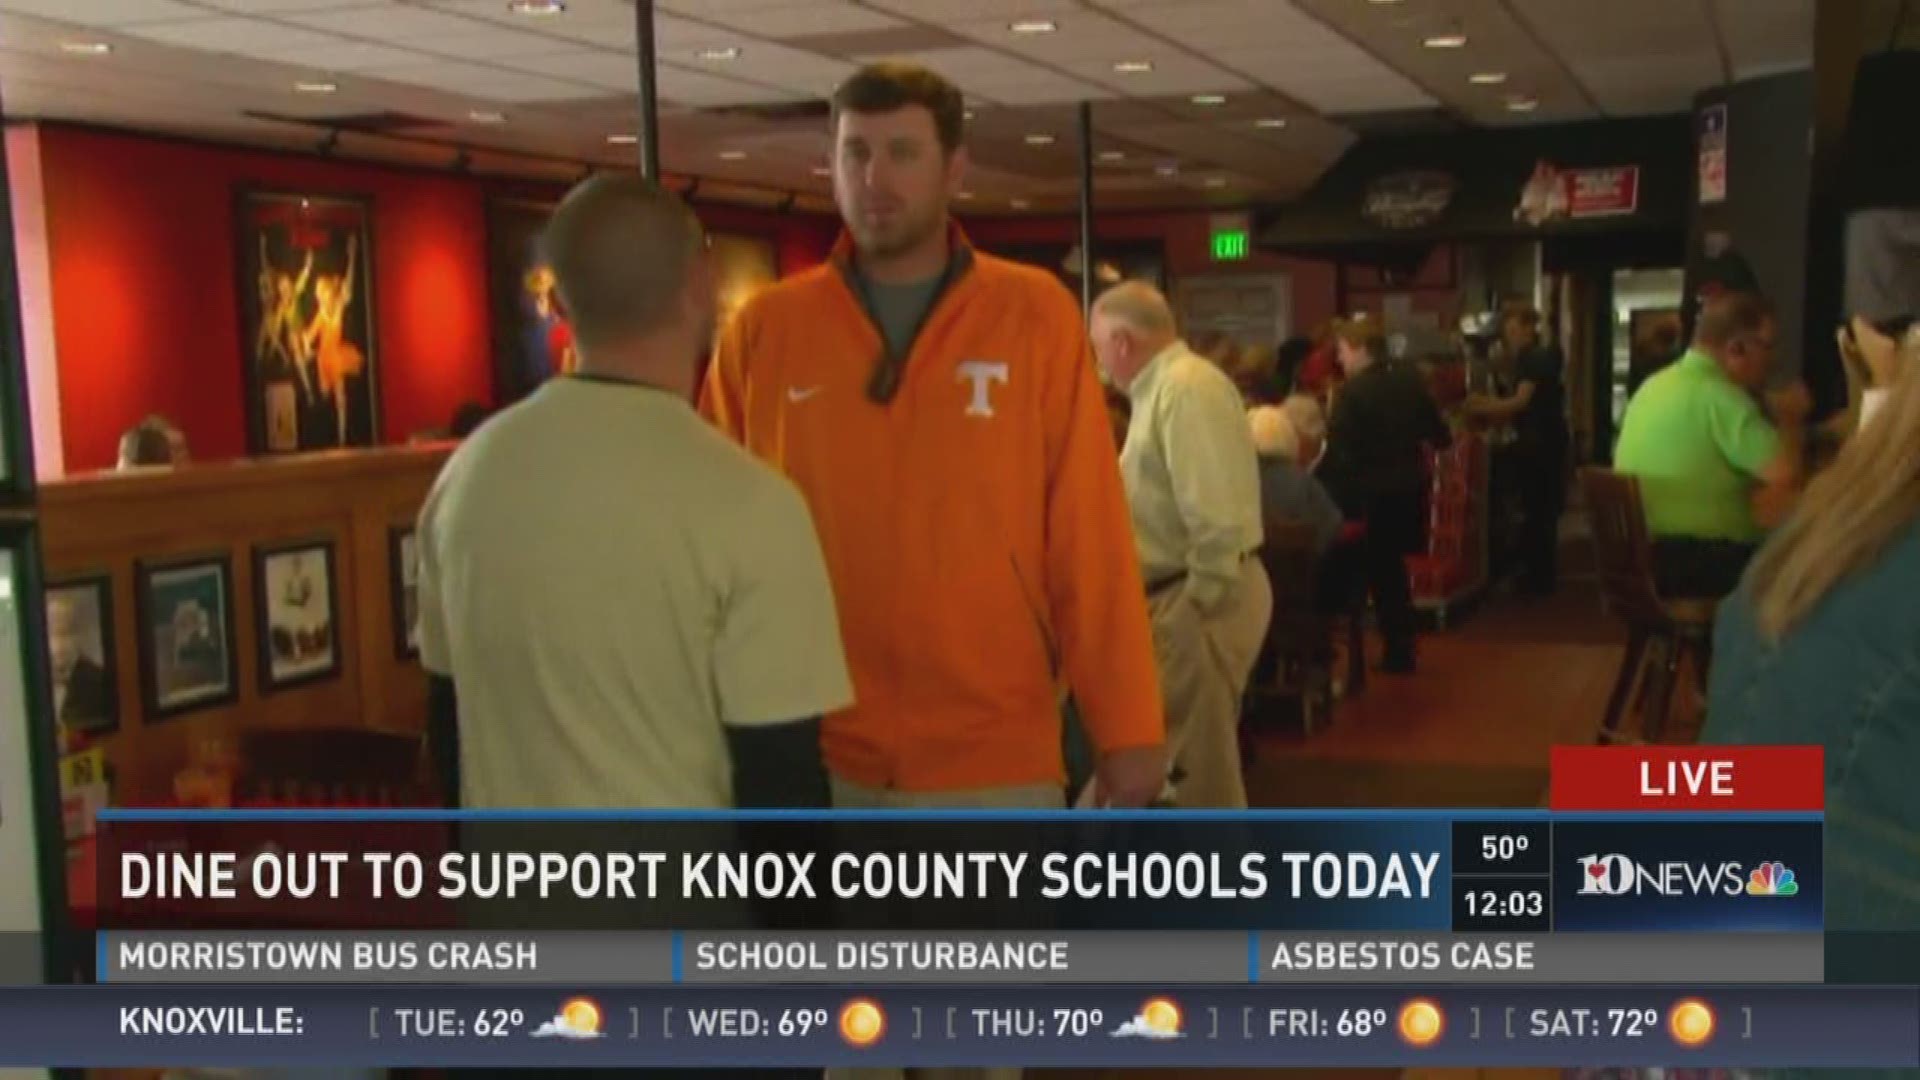 About 40 East Tennessee restaurant chains at almost 70 locations will donate 10 percent of the pre-tax proceeds from their Tuesday sales to the Knox County Schools.